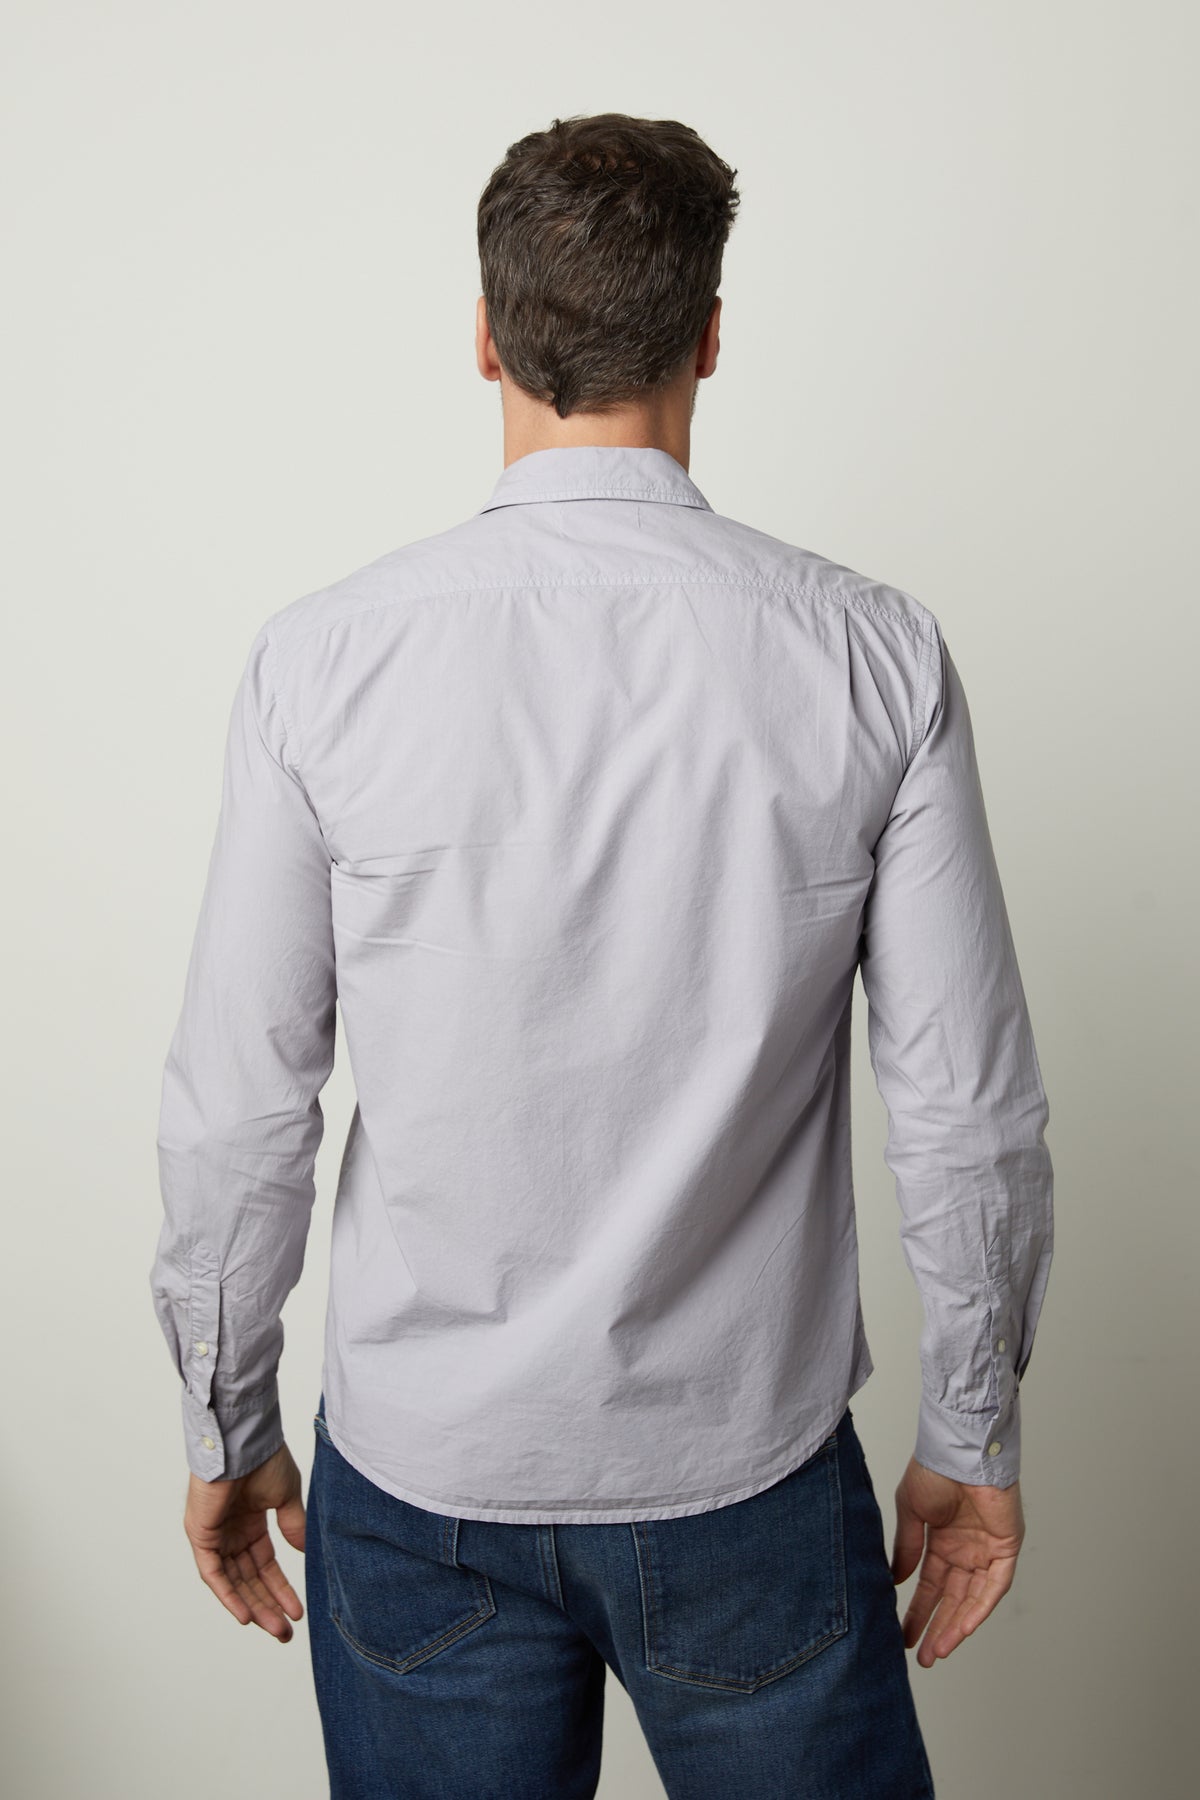   The back view of a man wearing jeans and a Velvet by Graham & Spencer BROOKS BUTTON-UP SHIRT. 